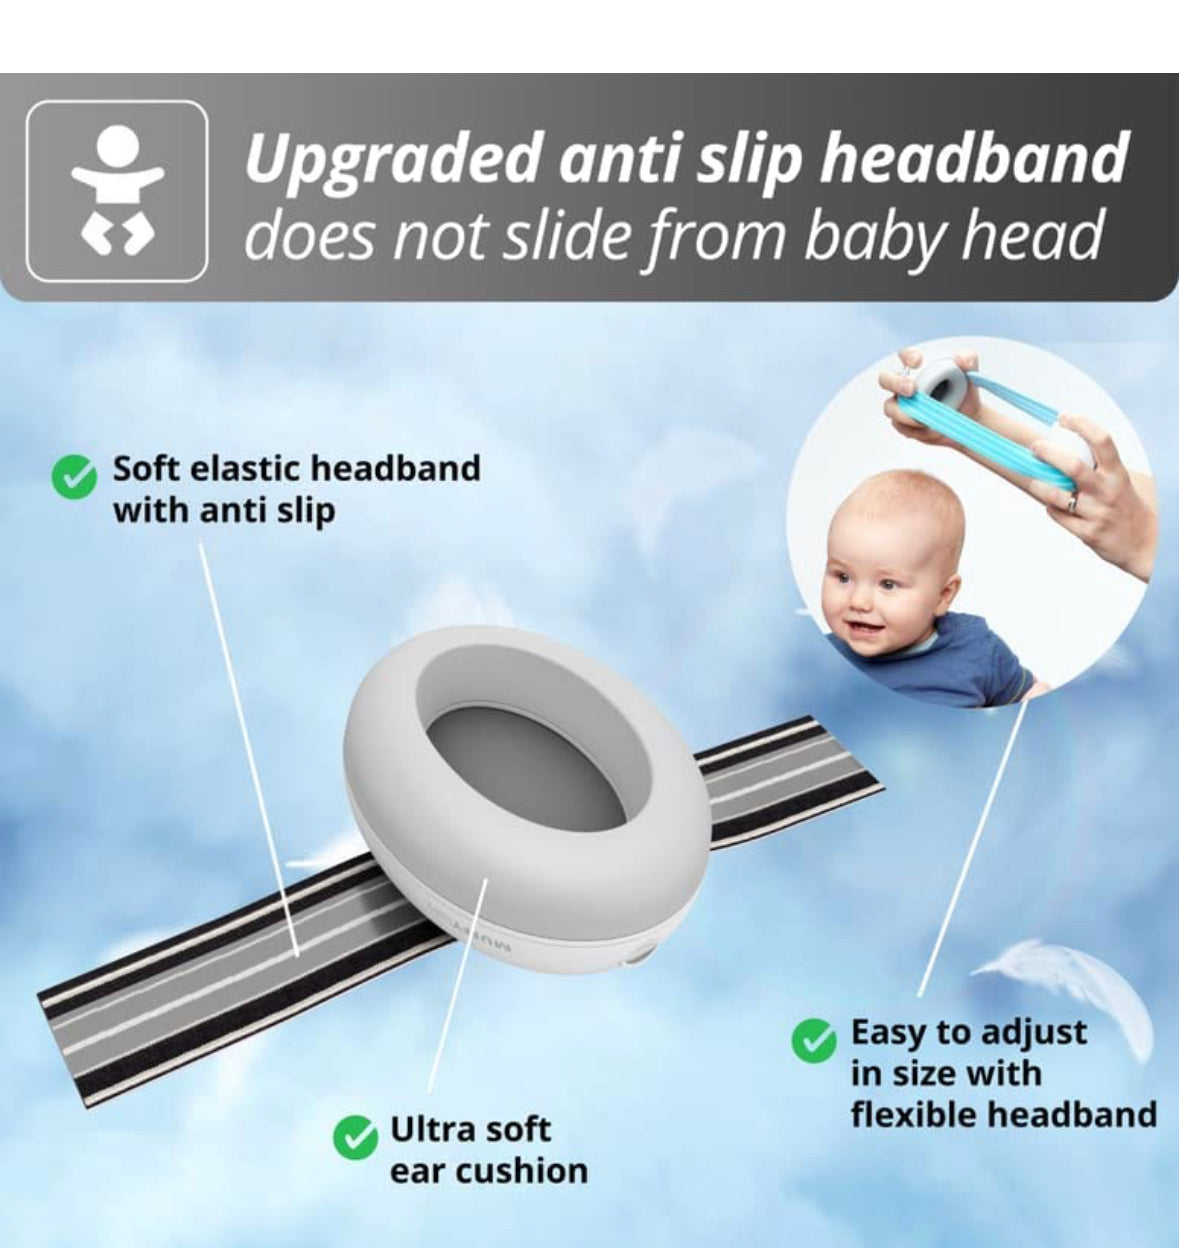 Alpine Muffy Baby Ear Protection for Babies and Toddlers up to 36 Months.